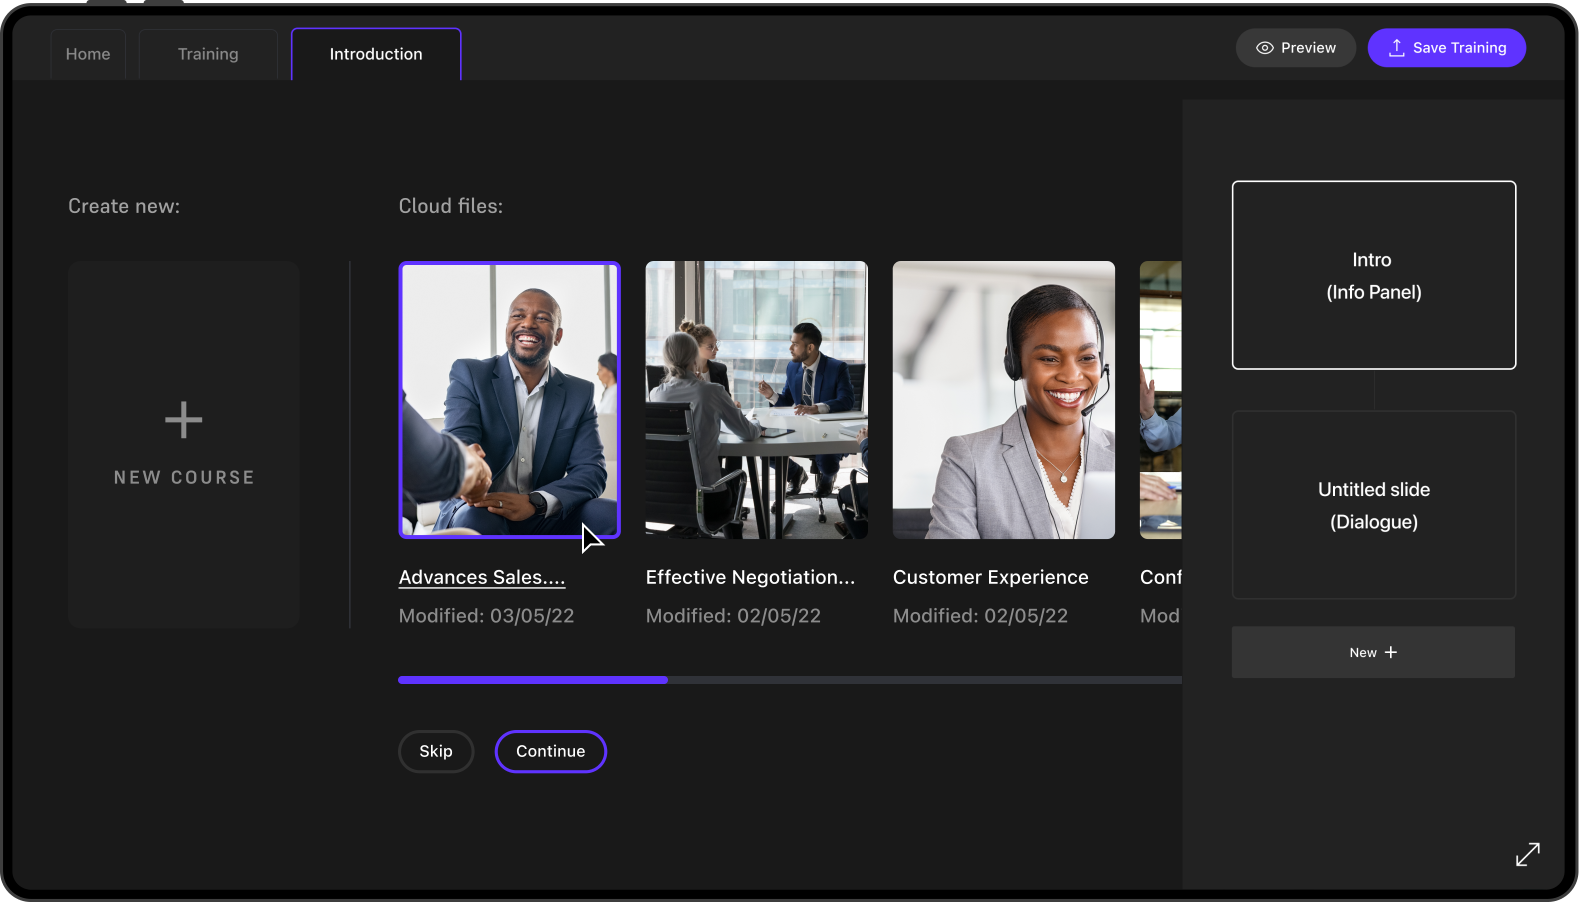 Render of the content-creation application opened to select a course to open. There are several courses to select from, titled 'Advanced Sales', 'Effective Negotiation', etc.